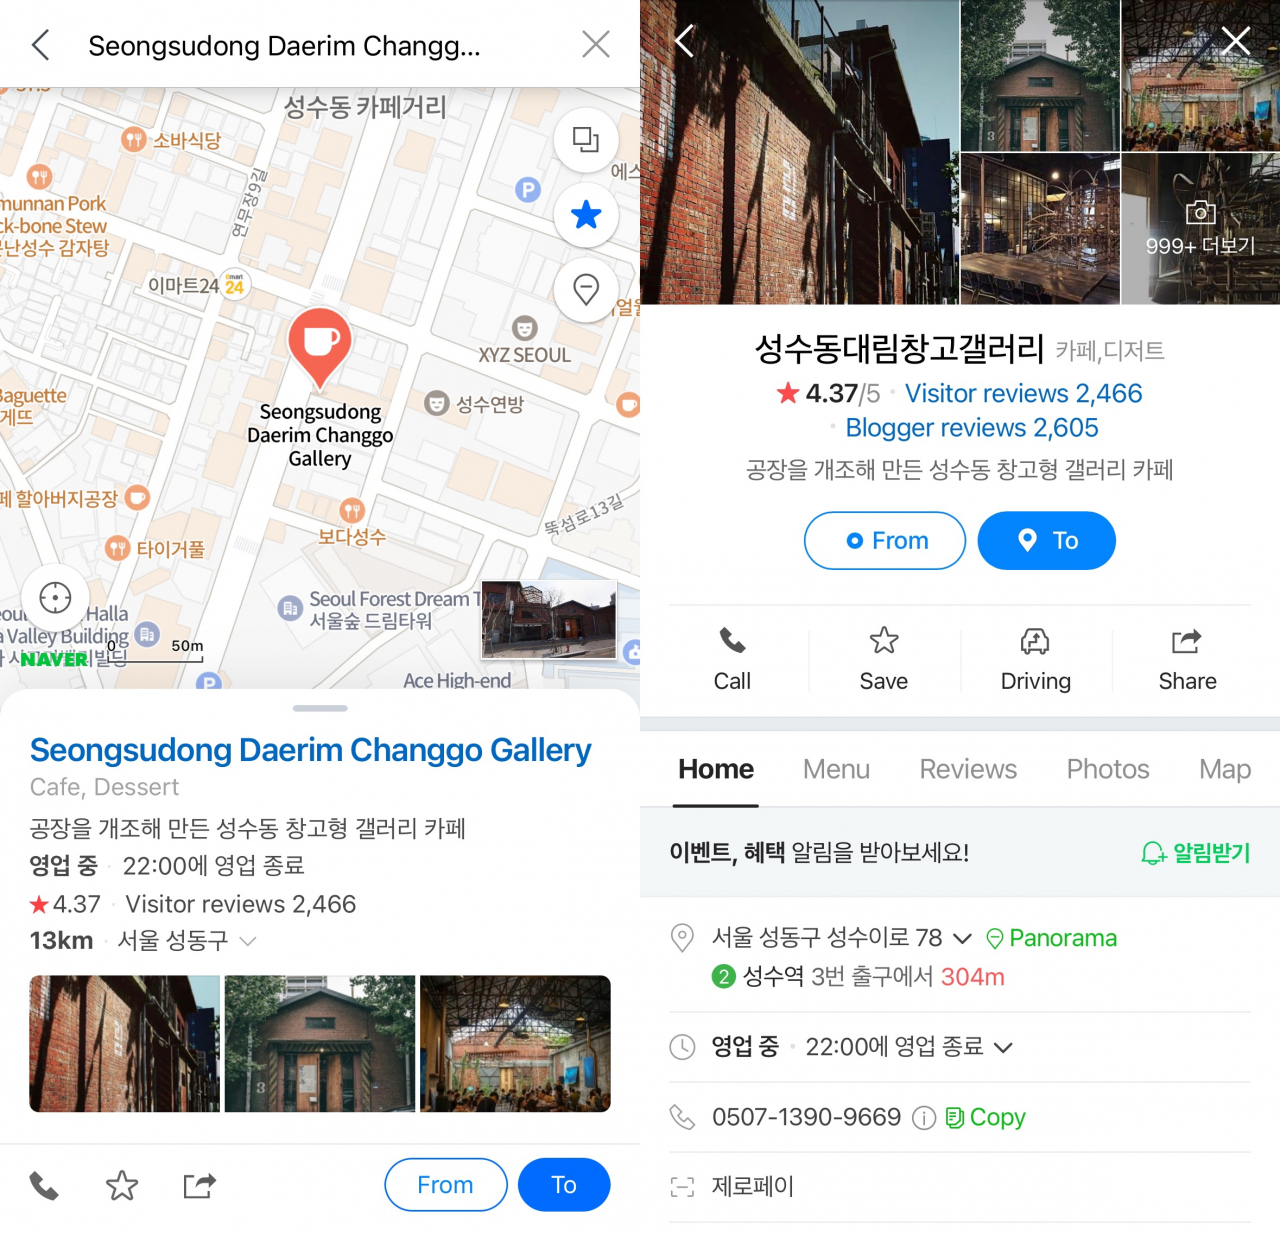 Naver launched multilingual maps in 2018 ahead of the Pyeongchang Winter Olympics, but most locations details, including location descriptions and reviews, remain untranslated and devoid of machine translation options. (Naver)